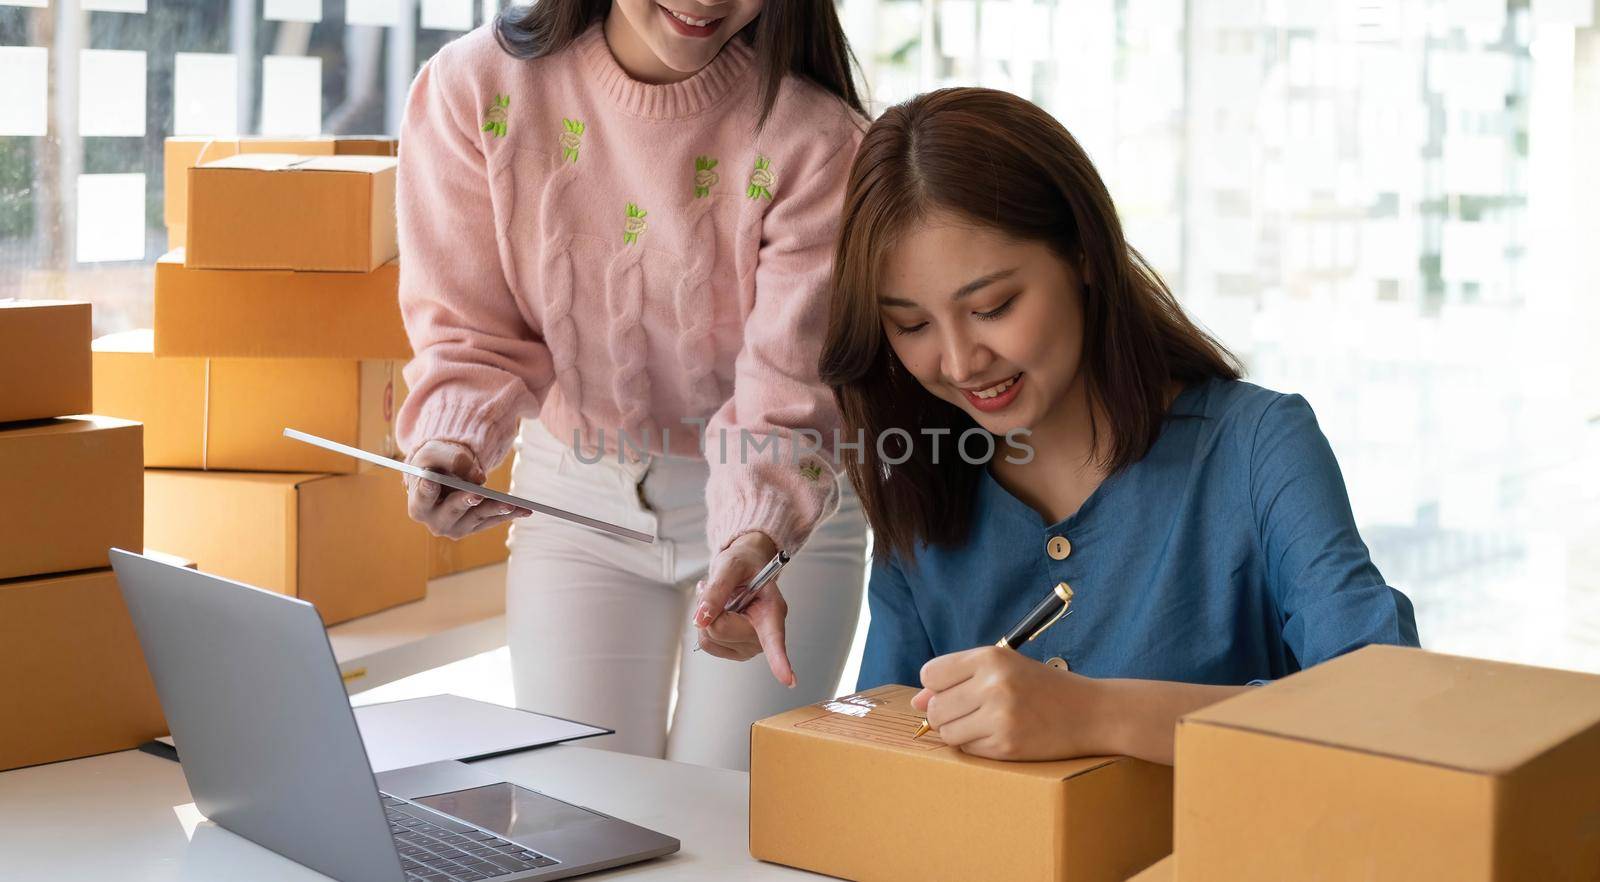 Portrait of Starting small businesses SME owners, two Asian woman check online orders Selling products working with boxs freelance work at home office, sme business online small medium enterprise by wichayada